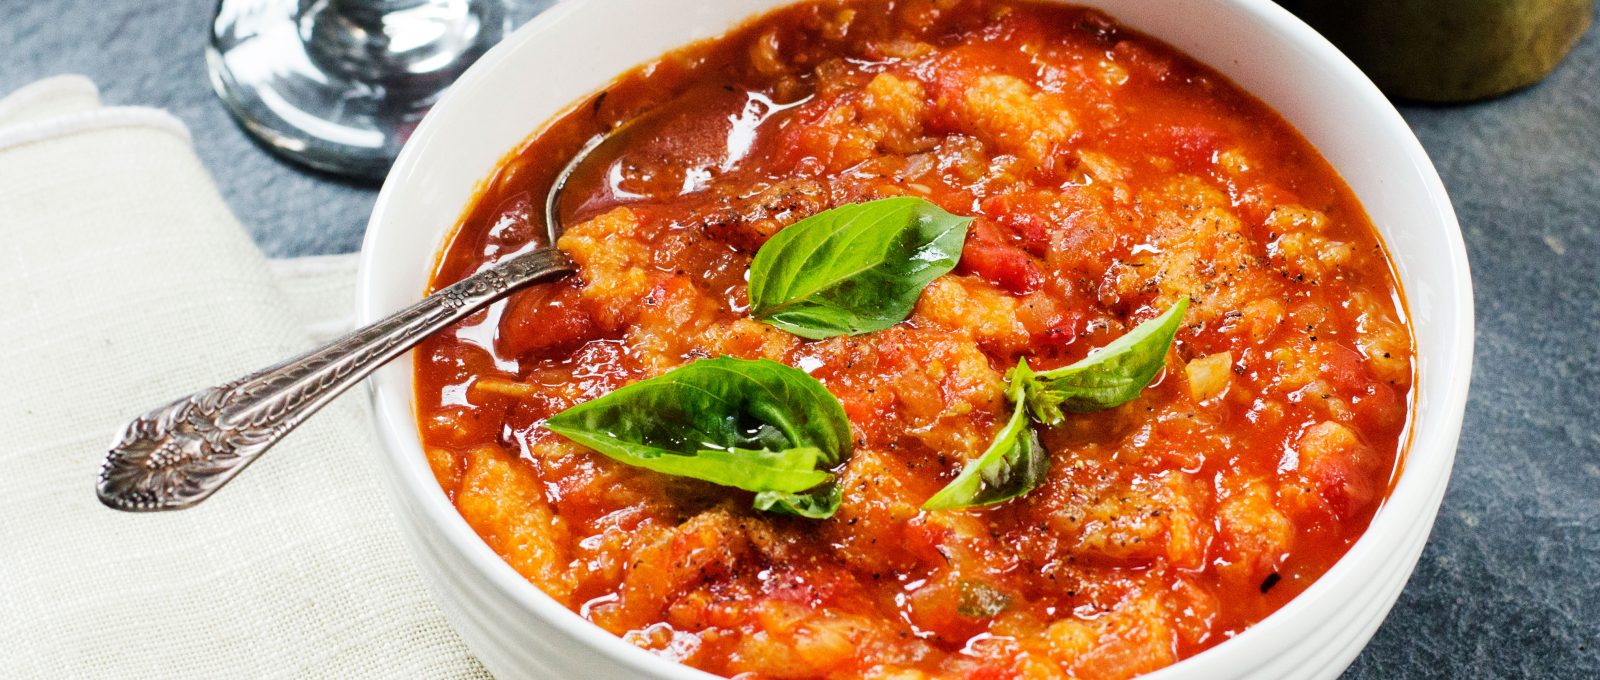 Andrew Zimmern's Tuscan Tomato Bread Soup